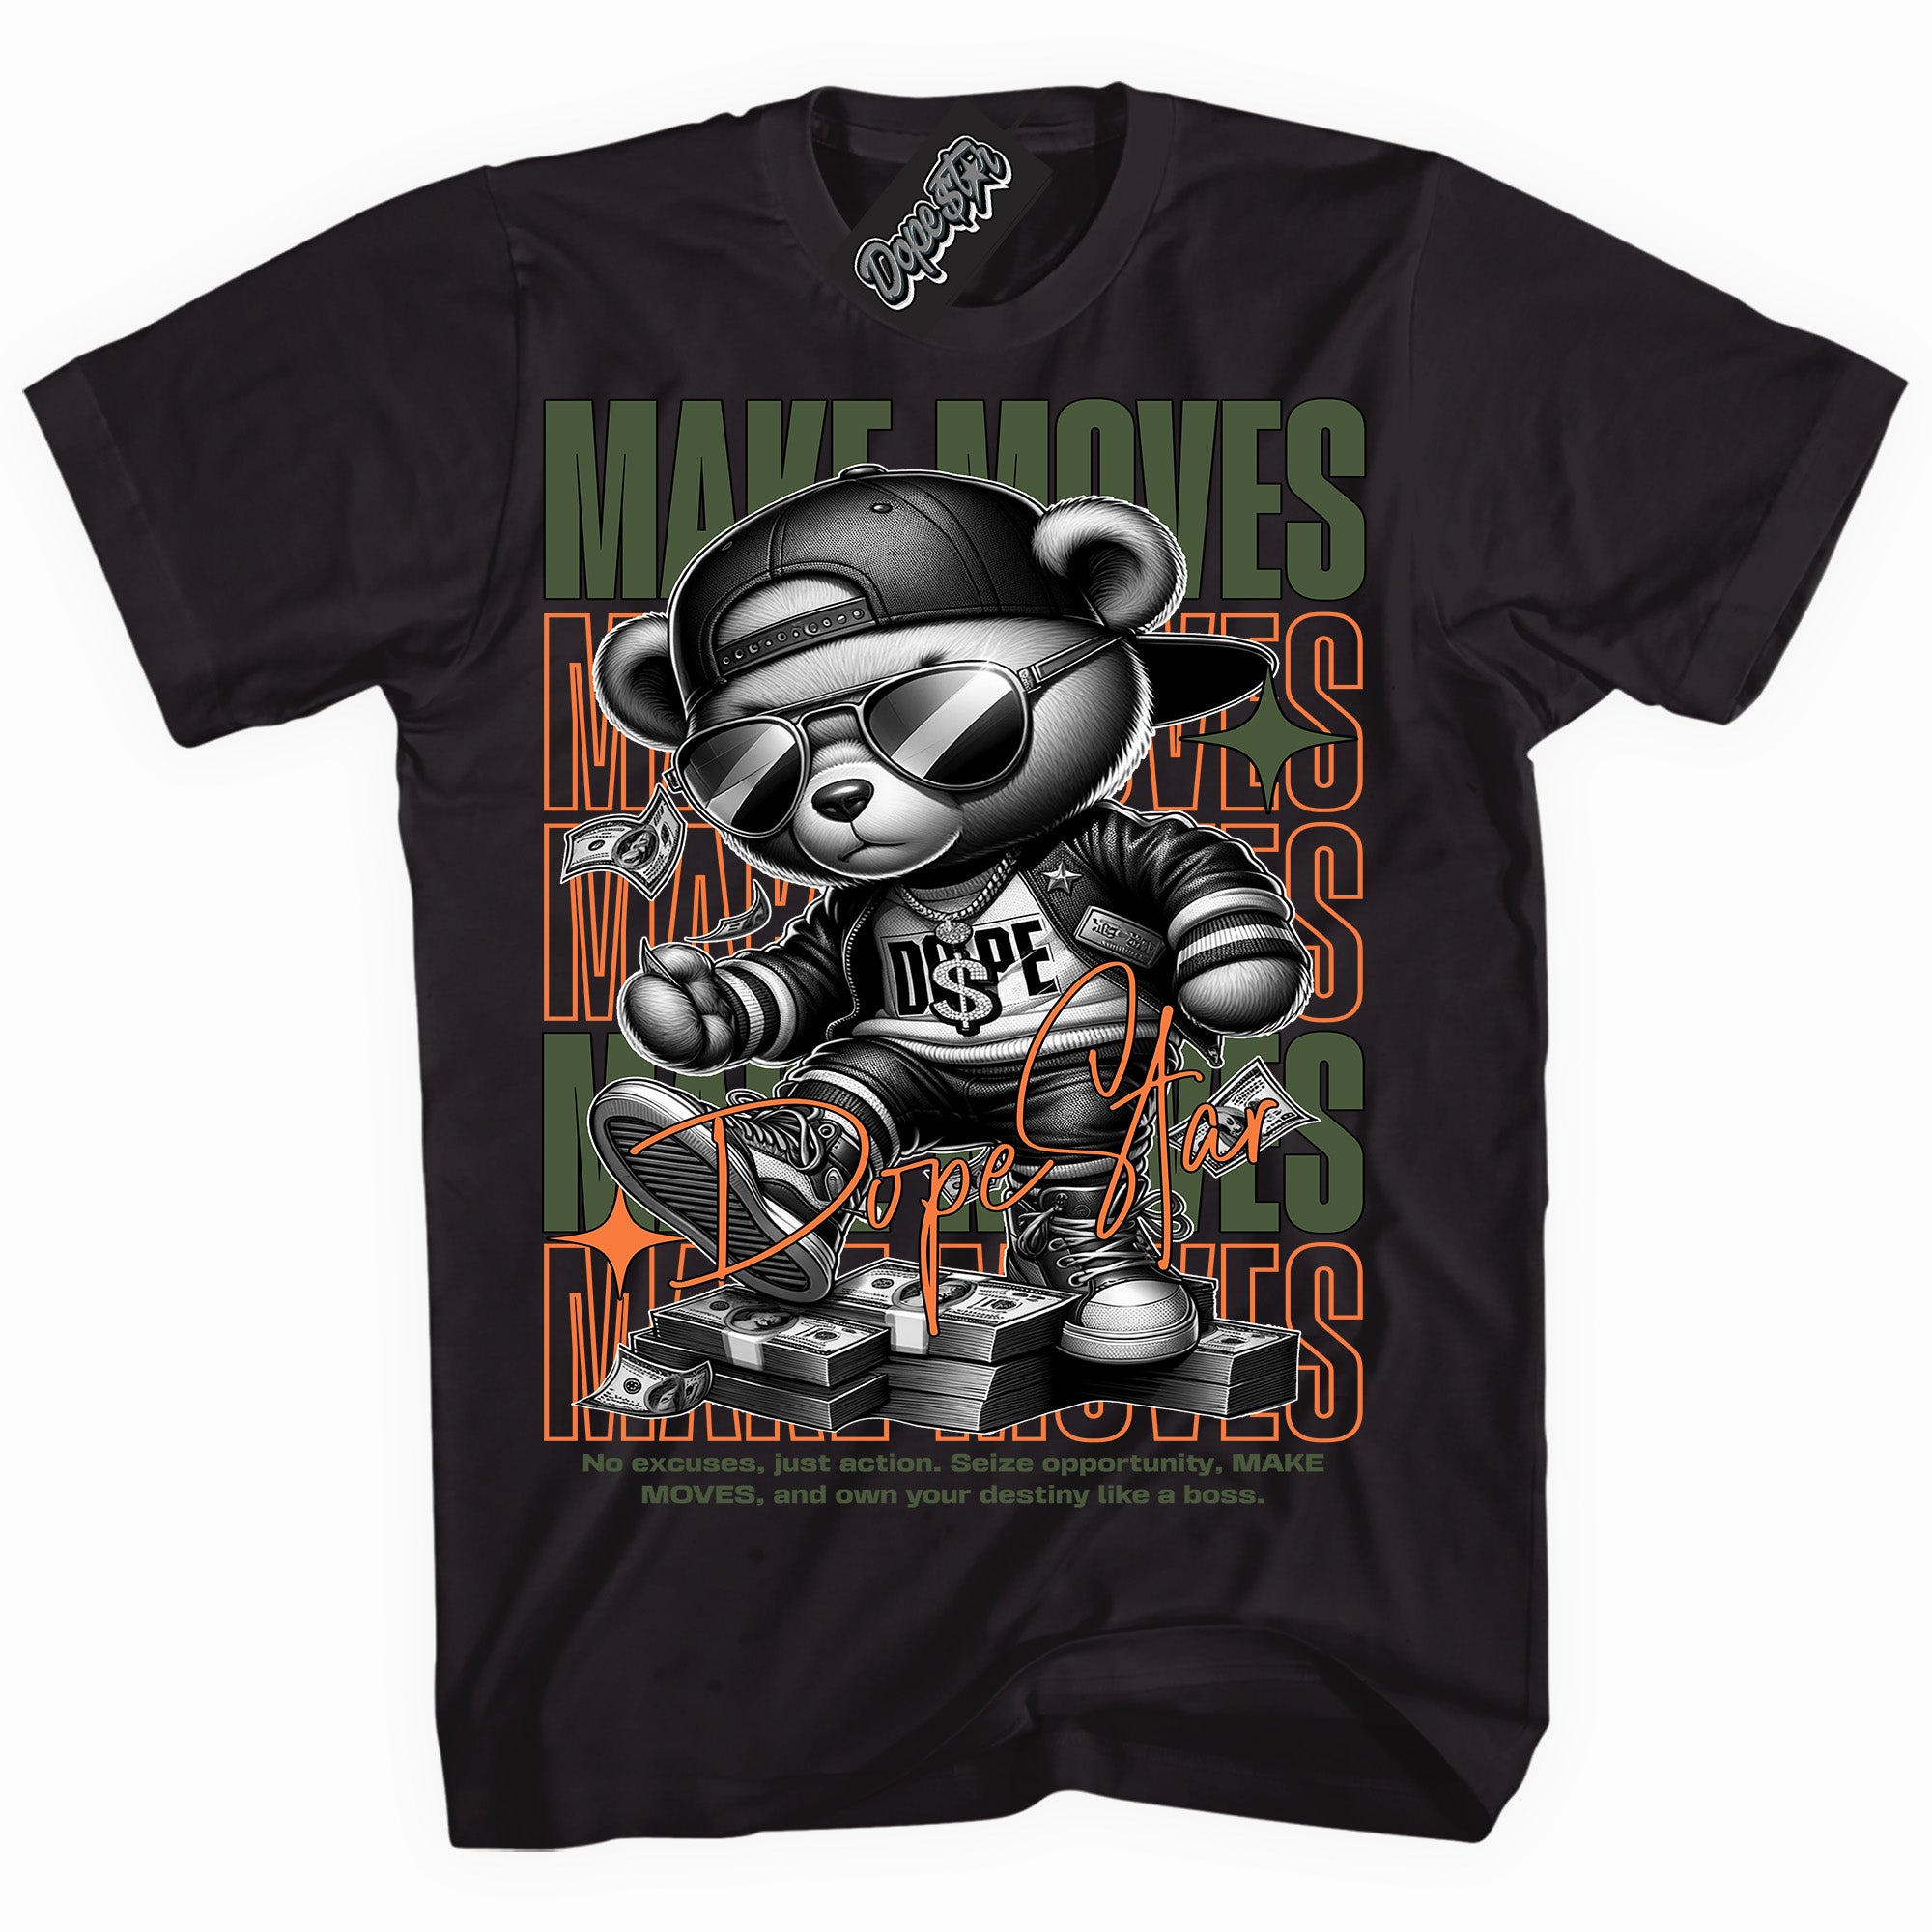 Cool Black graphic tee with “ Makin Moves ” print, that perfectly matches Olive 5s sneakers 